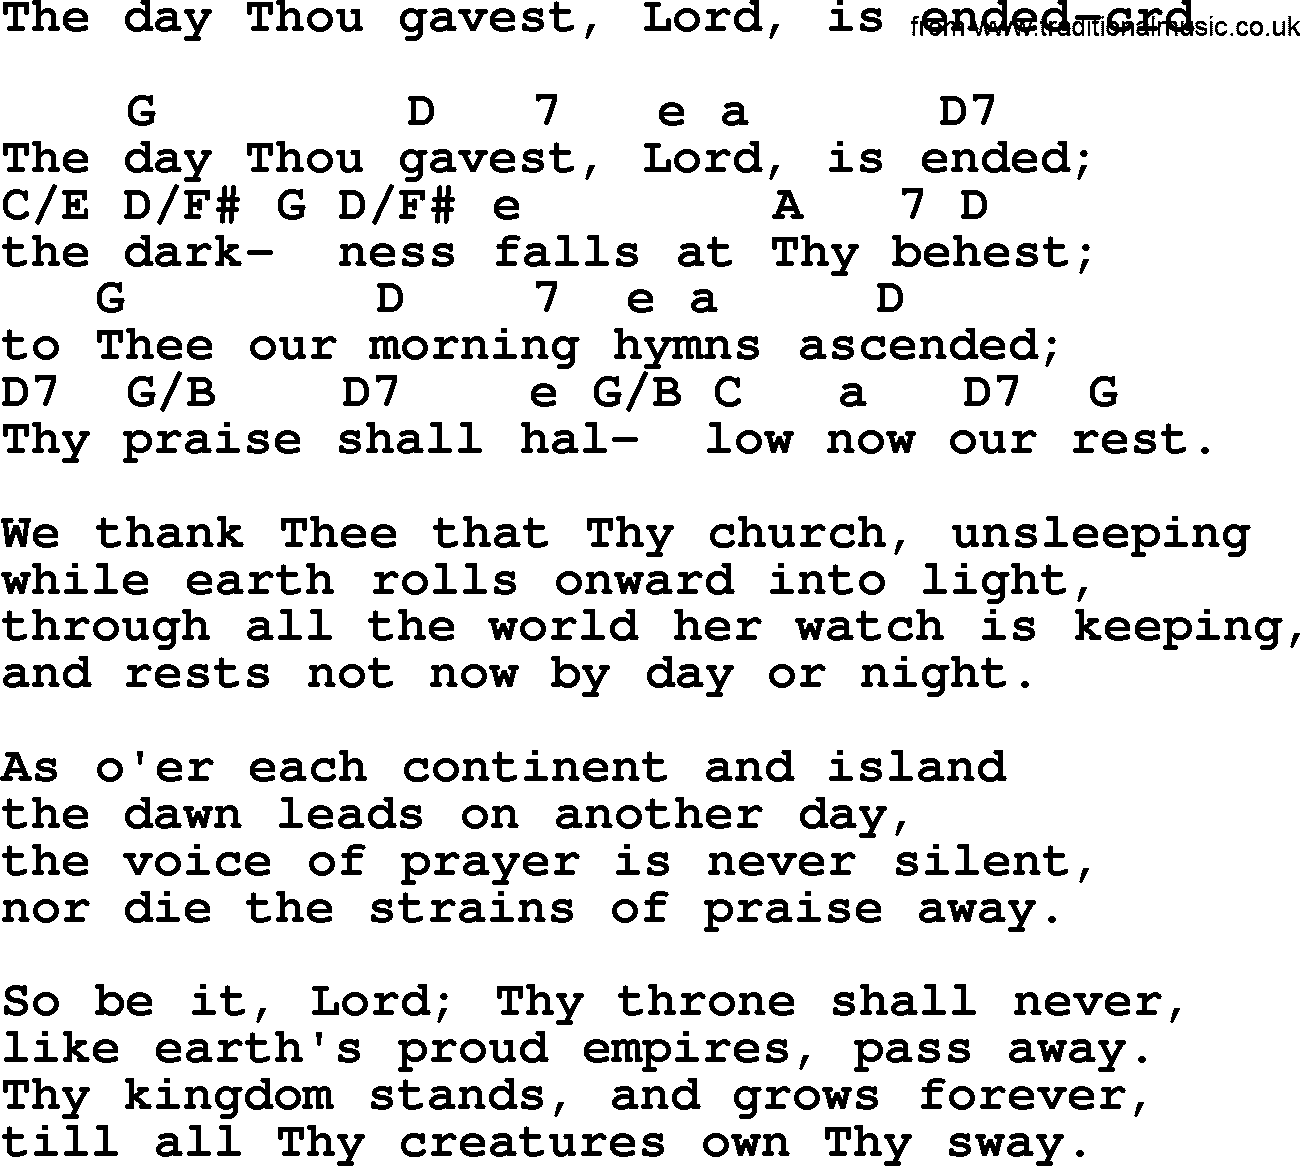 Top 500 Hymn: The Day Thou Gavest, Lord, Is Ended, lyrics and chords